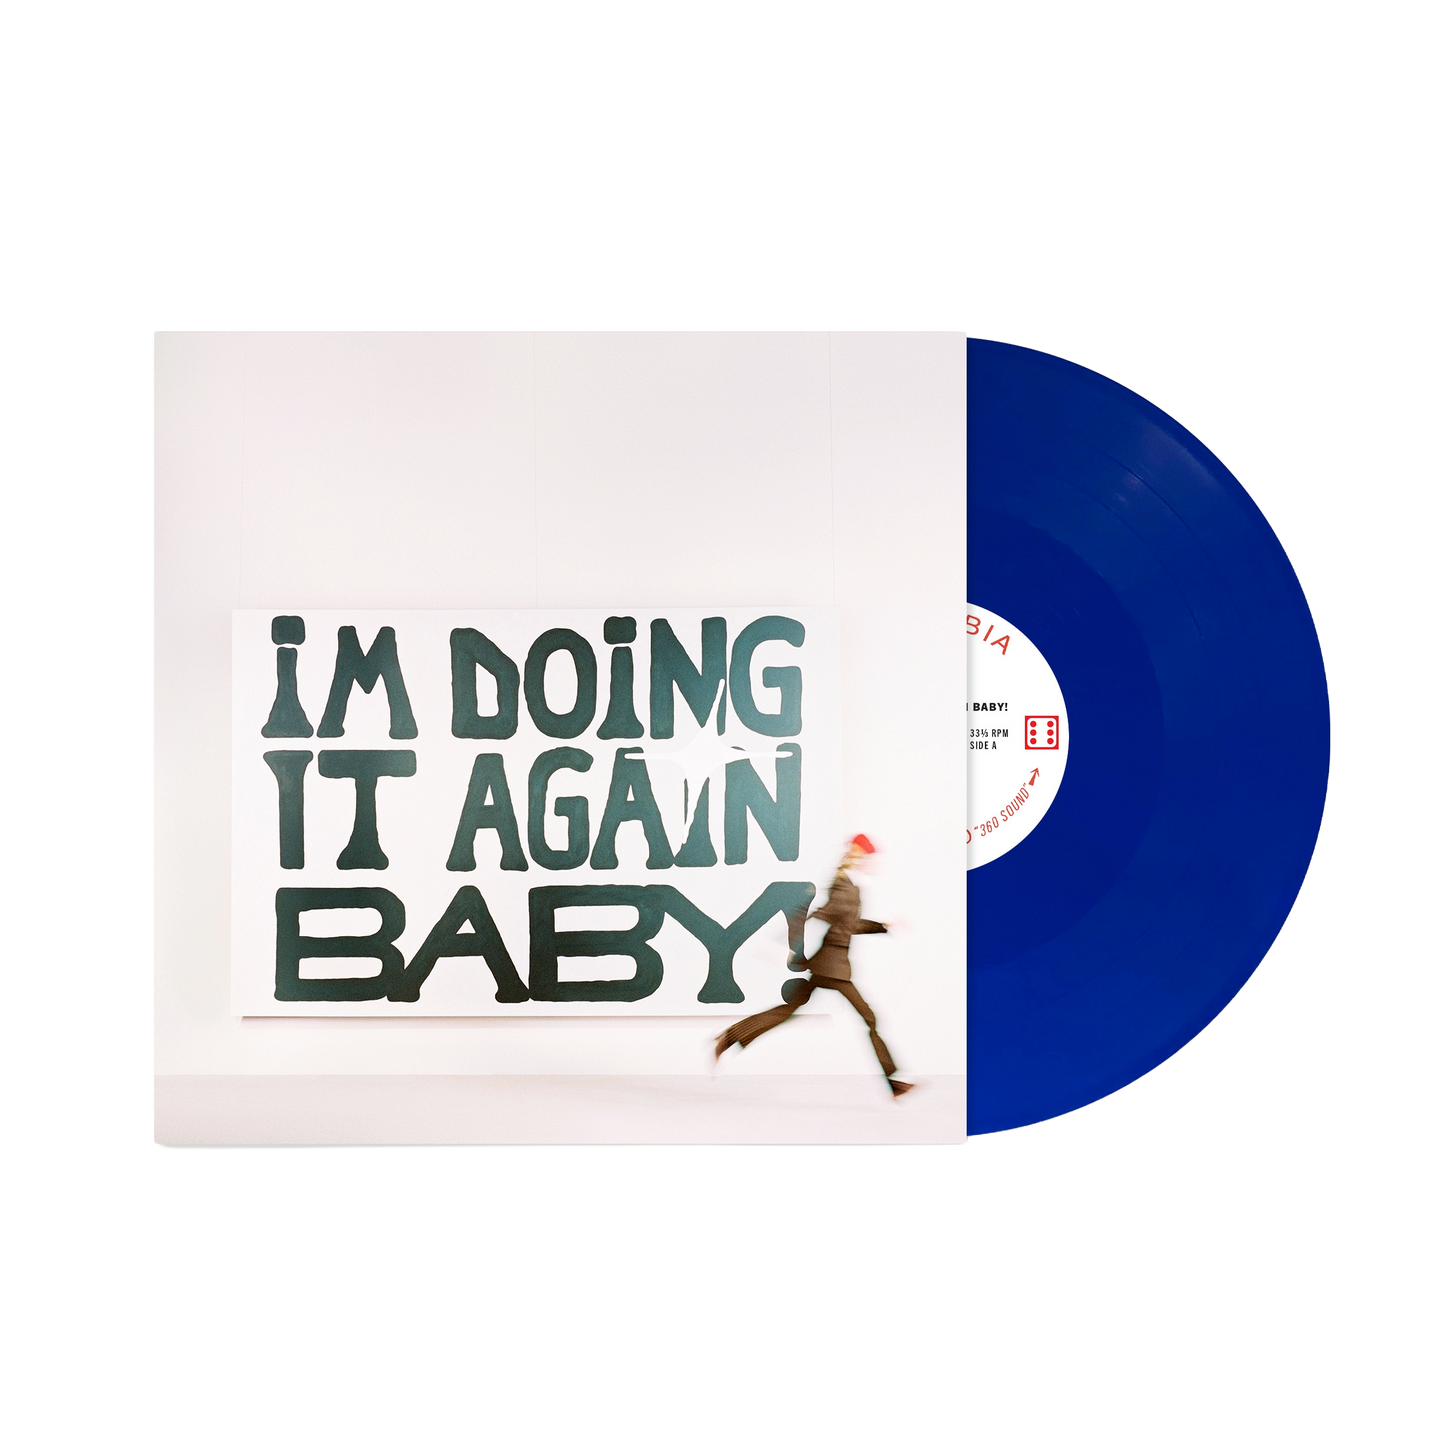 I'M DOING IT AGAIN BABY! LIMITED EDITION SPOTIFY FANS FIRST VINYL